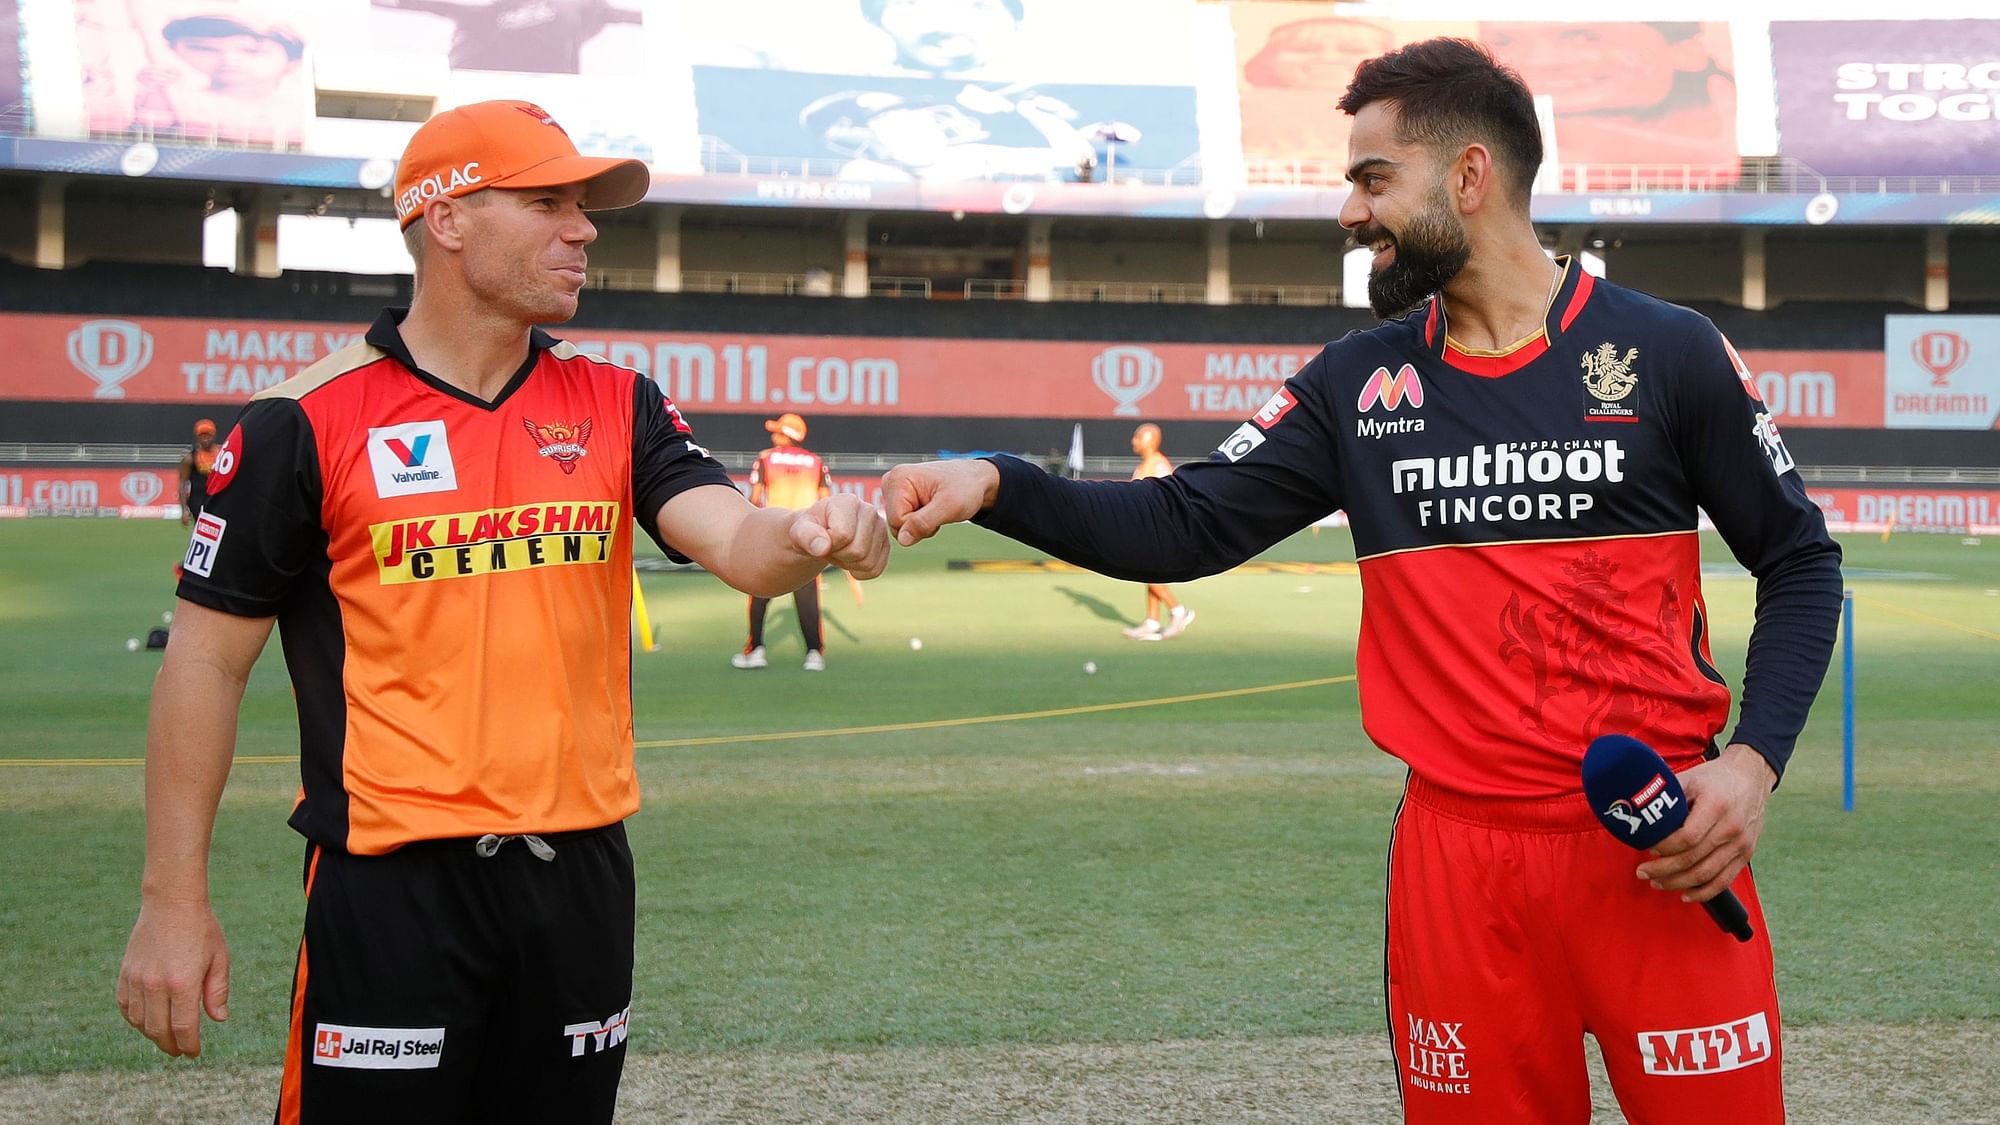 Sunrisers Hyderabad captain David Warner won the toss and opted to bowl against Virat Kohli’s Royal Challengers Bangalore.